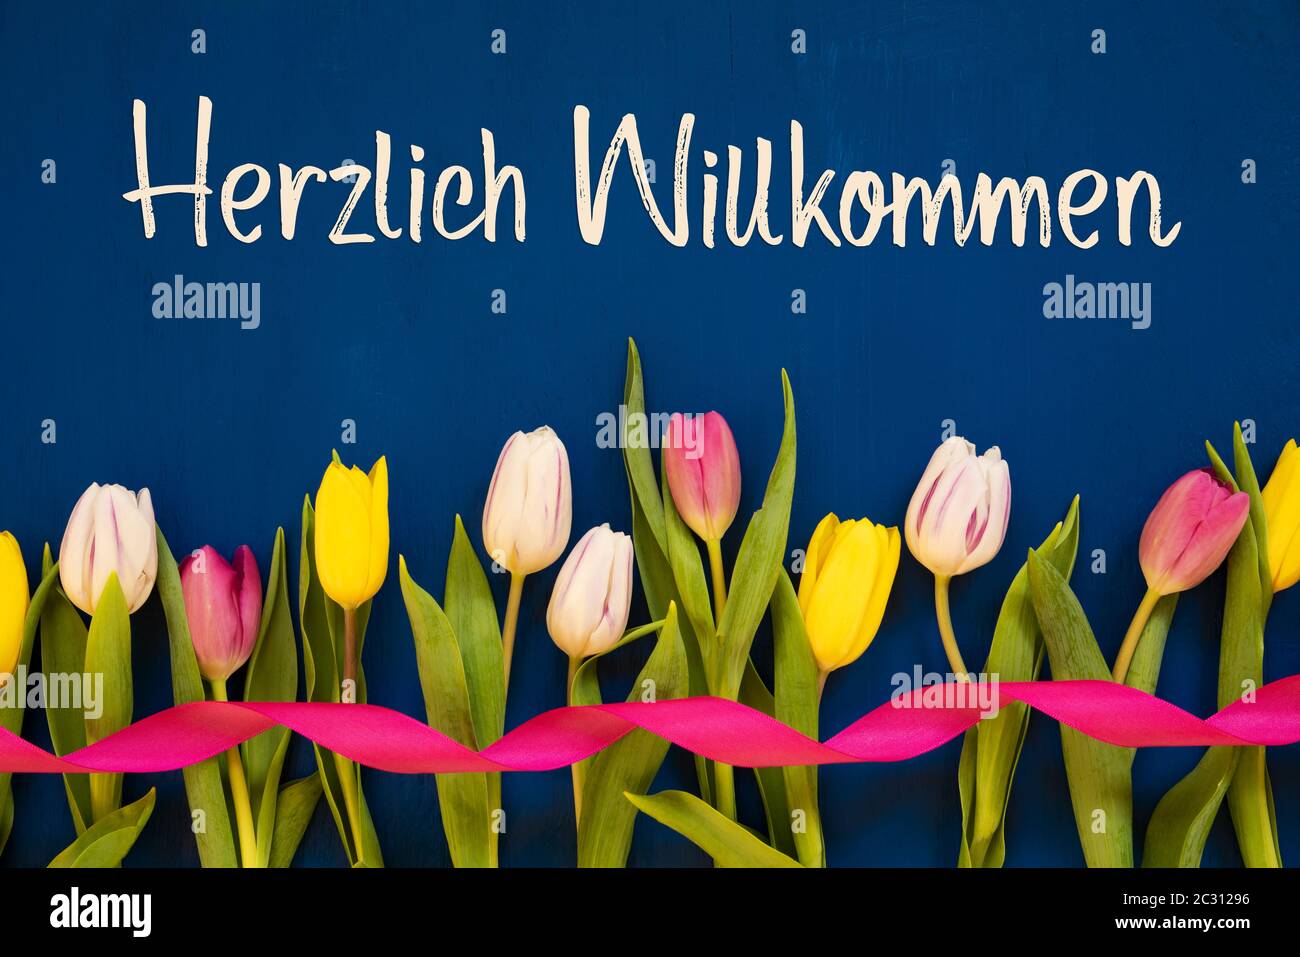 German Text Herzlich Willkommen Means Welcome. White And Pink Tulip Spring Flowers With Ribbon. Blue Wooden Background Stock Photo